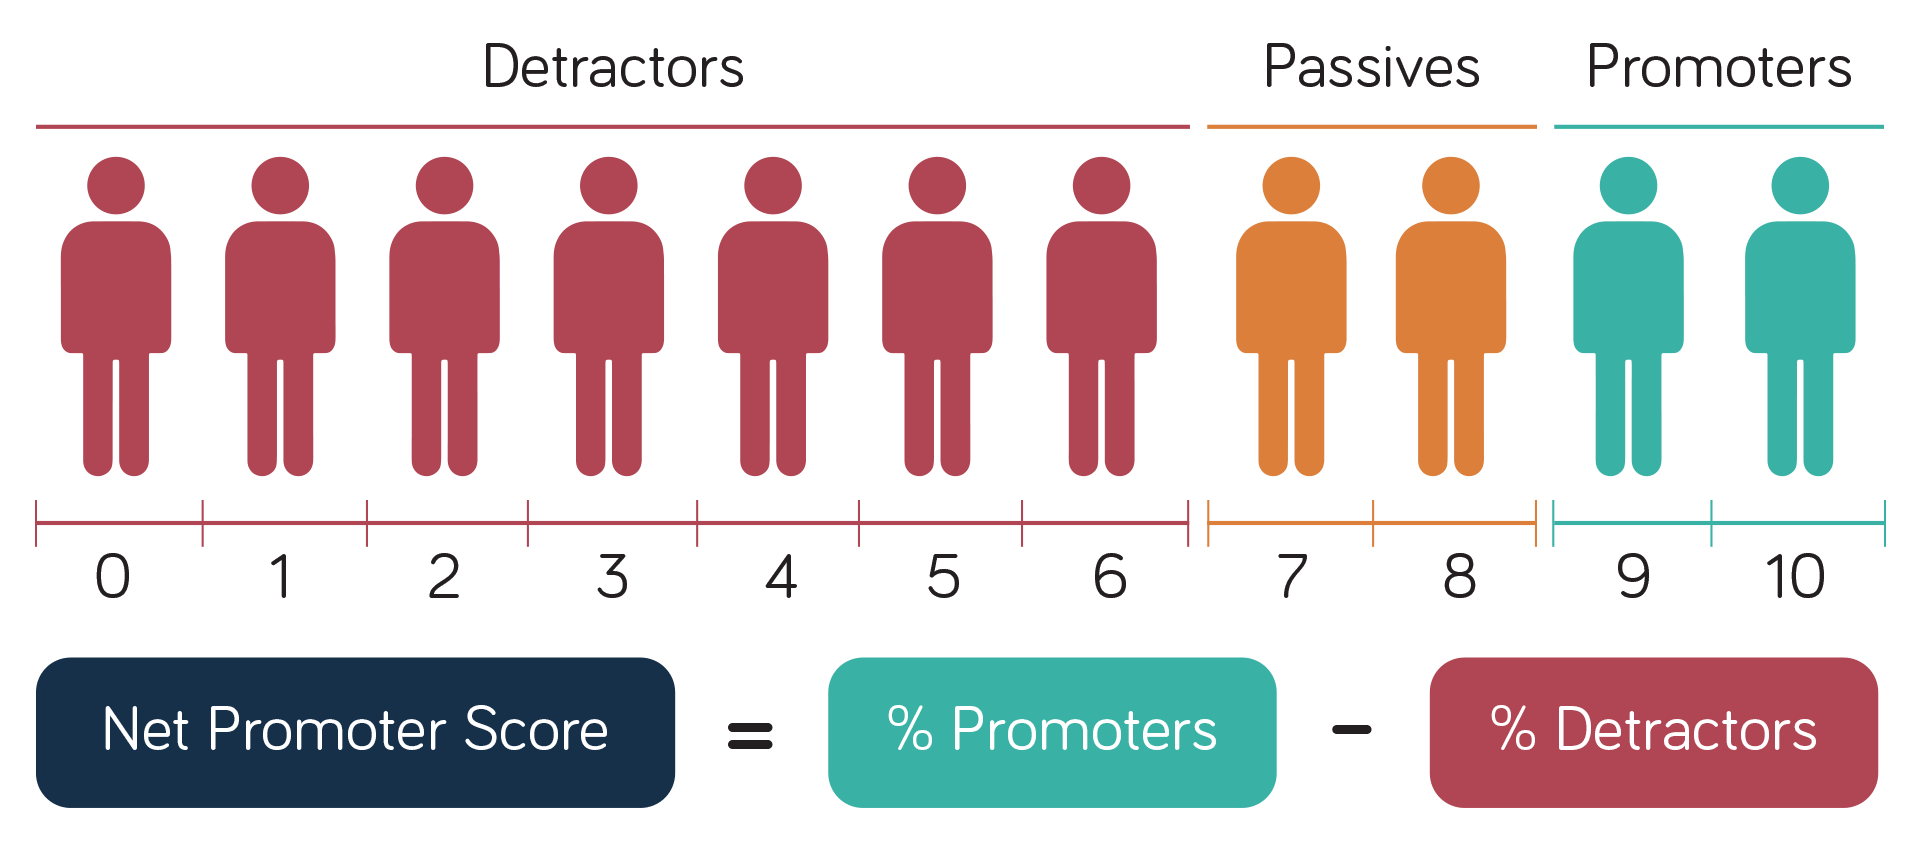 Graphic showing how the Net Promoter Score is calculated: by subtracting the percentage of Detractors (scoring 0-6 - coloured red) from the percentage of Promoters (scoring 9-10 - coloured green)